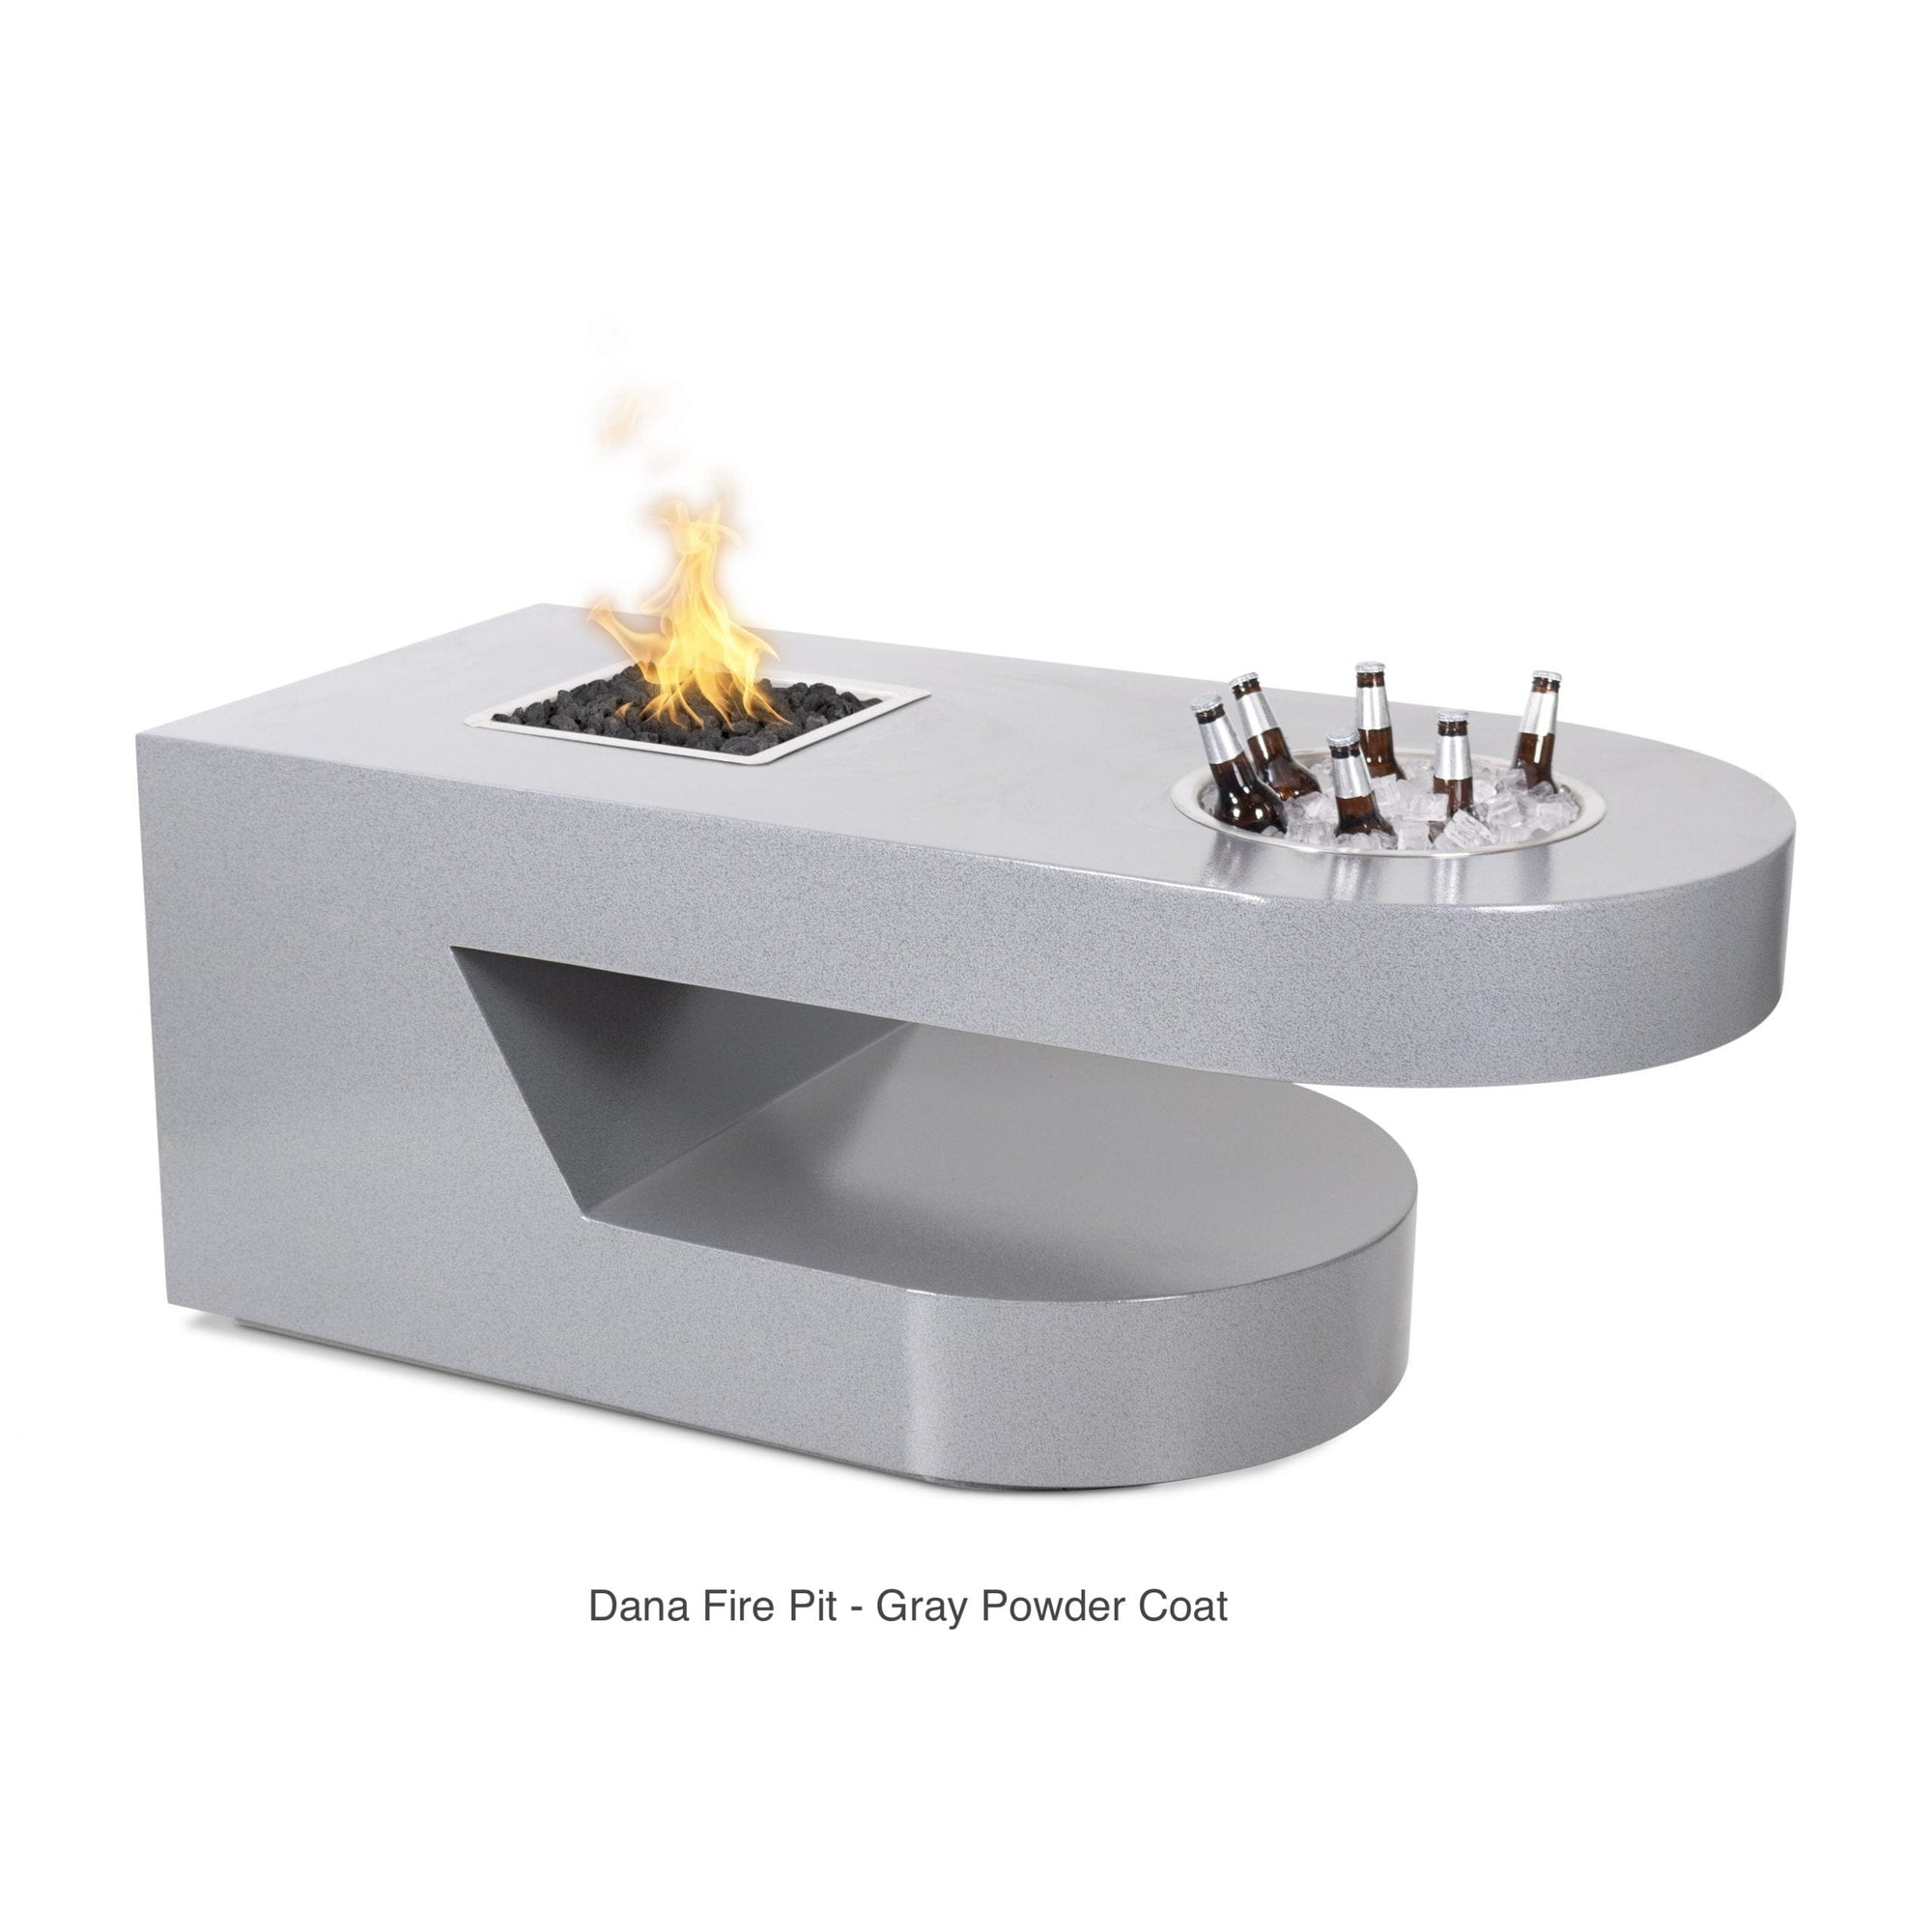 The Outdoor Plus Fire Features The Outdoor Plus 60" Rectangular Dana Fire Table - Metal Collection / OPT-DANCPR60, OPT-DANCS60, OPT-DANSS60, OPT-DANPC60